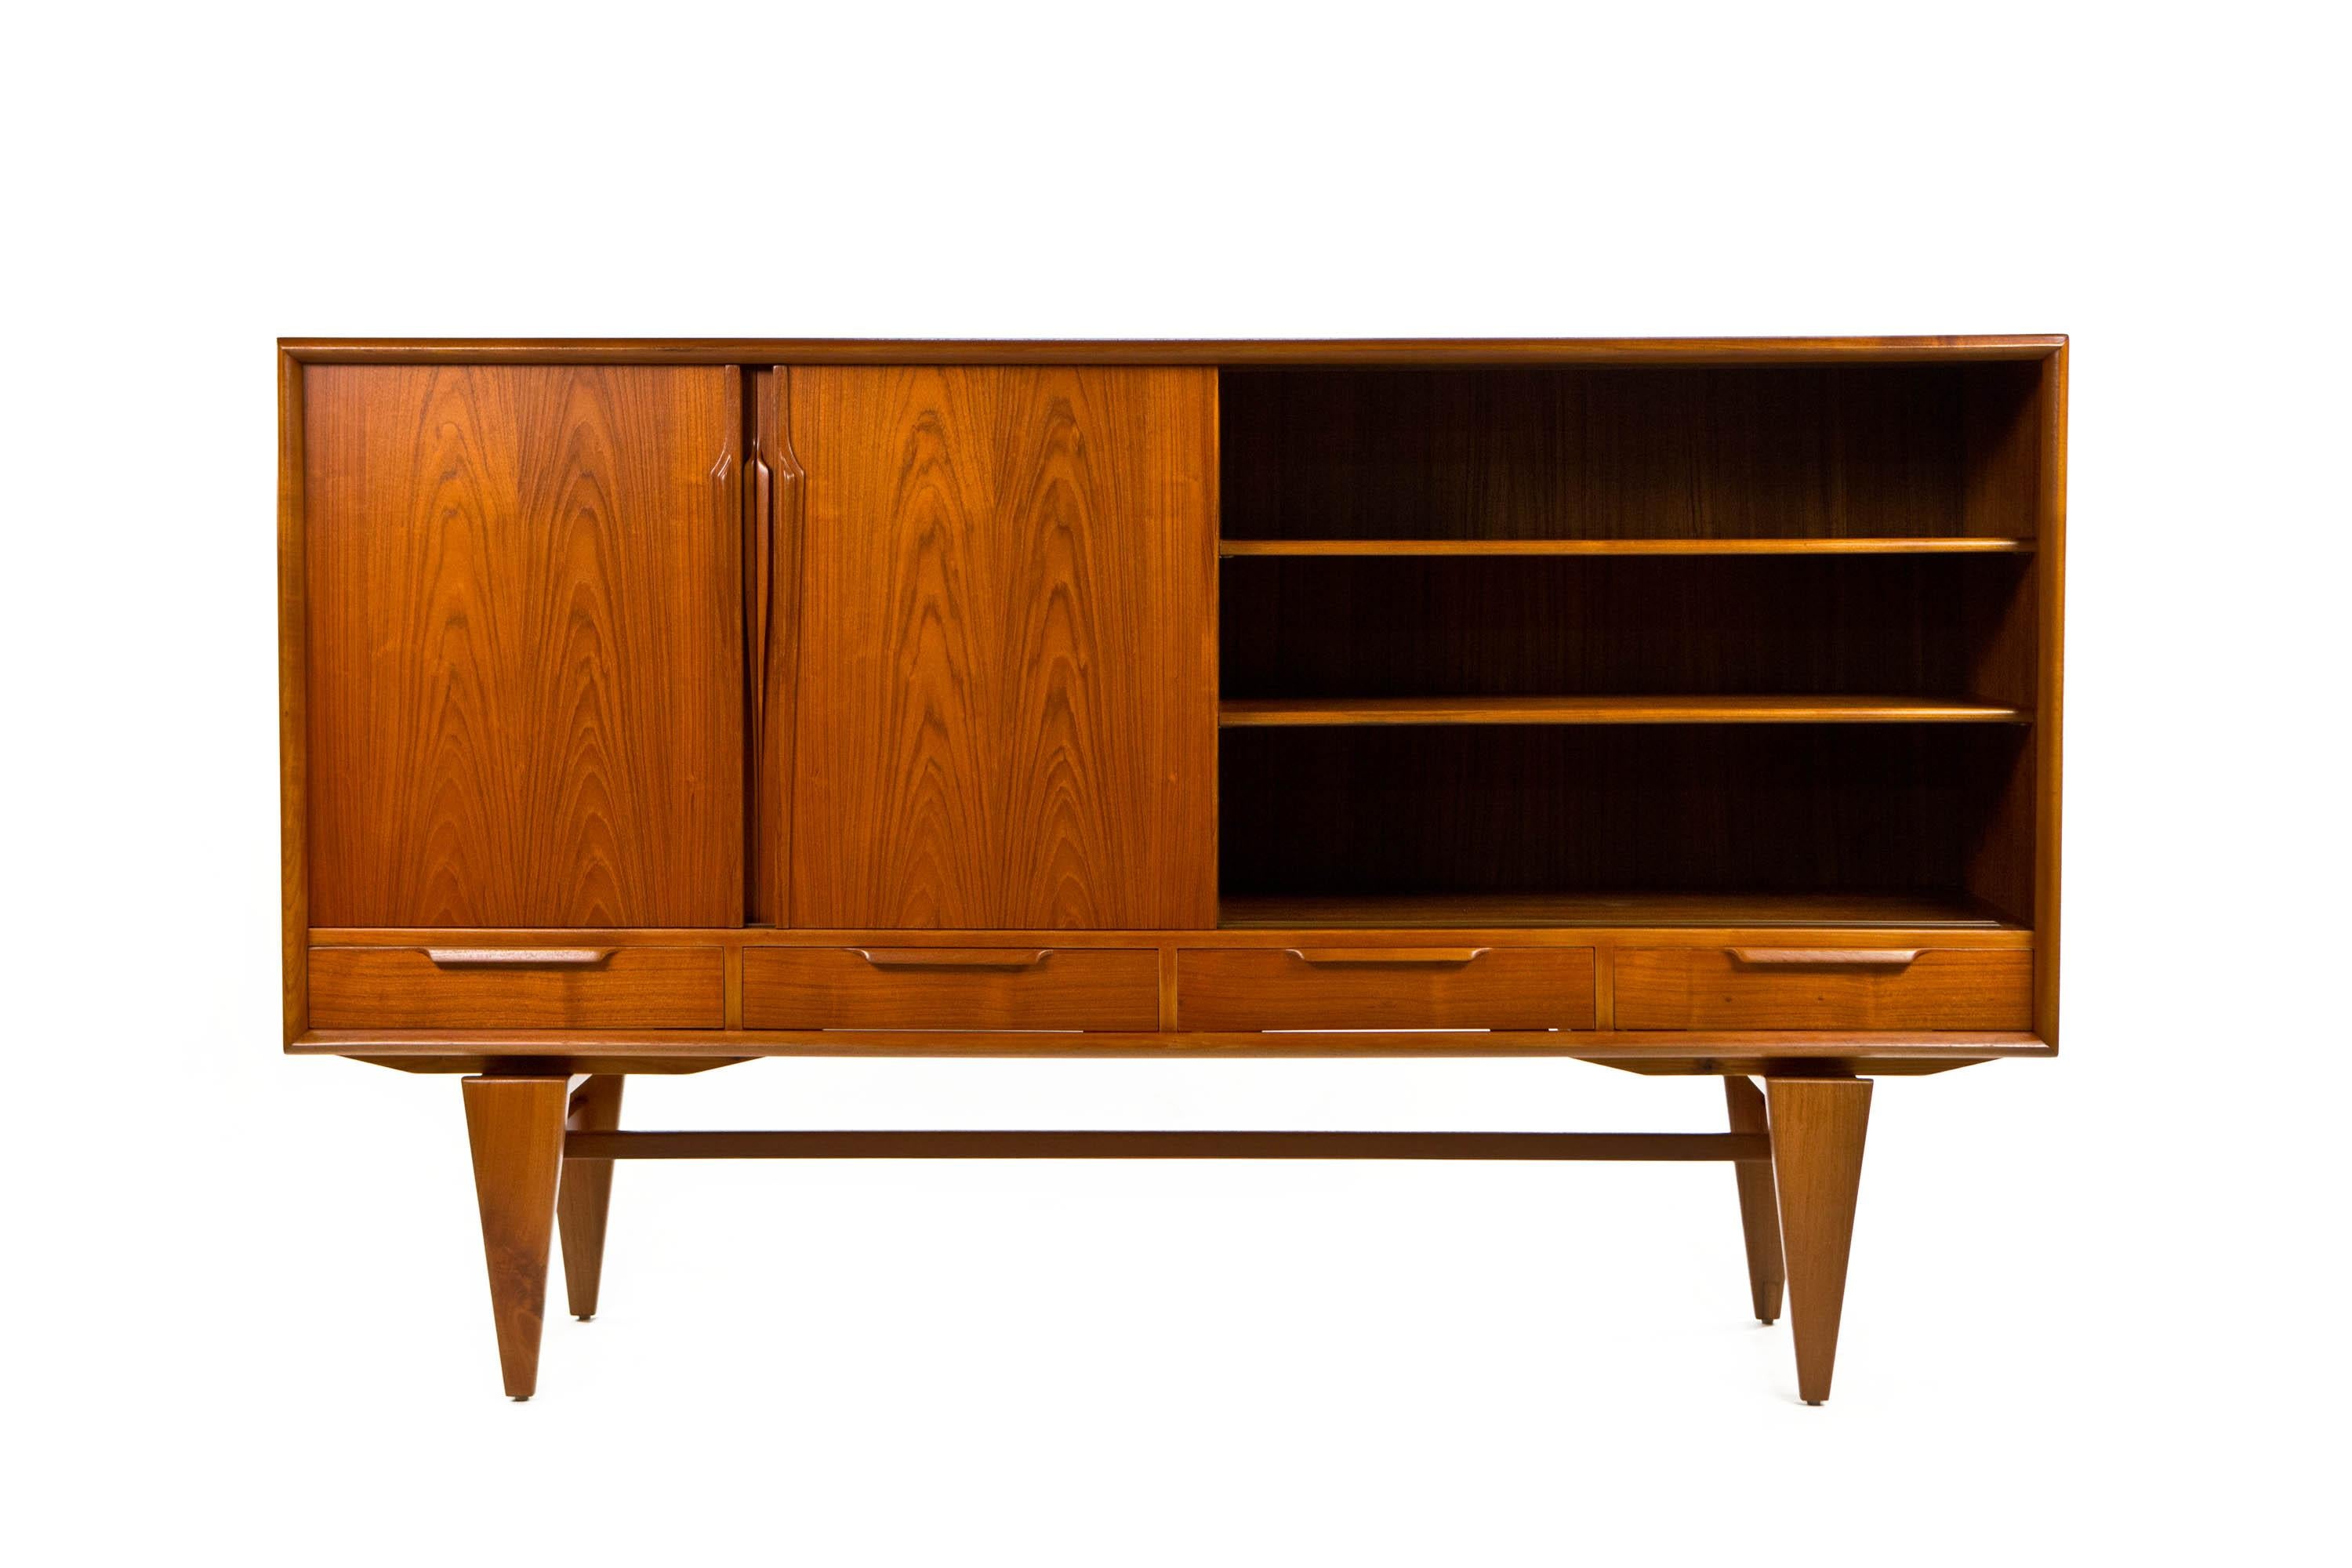 Axel Christensen Odder Vintage Danish Teak Highboard by ACO Mobler Denmark 1960s

High quality high board by Axel Christensen Odder for ACO Mobler. Made in Denmark 1960's. 

Spacious and elegantly proportioned sideboard with four sliding doors